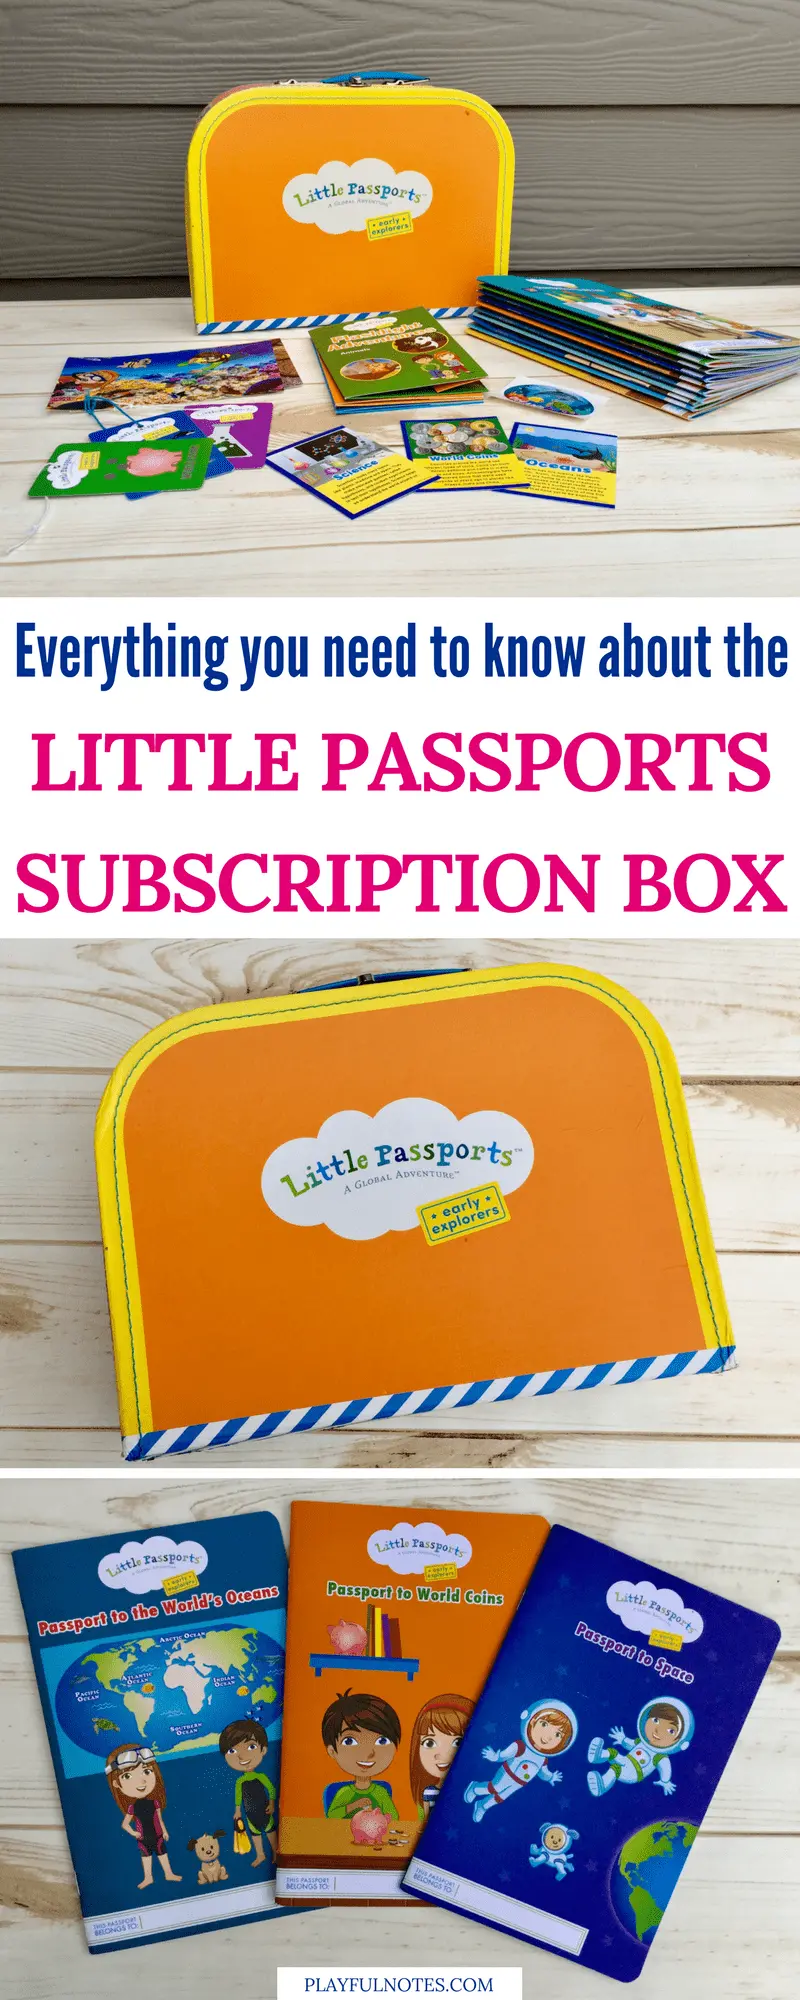 Little Passports subscription box: The best way to teach kids about the world in a fun and playful way! | Early Explorers | Subscription box for kids #LittlePassports